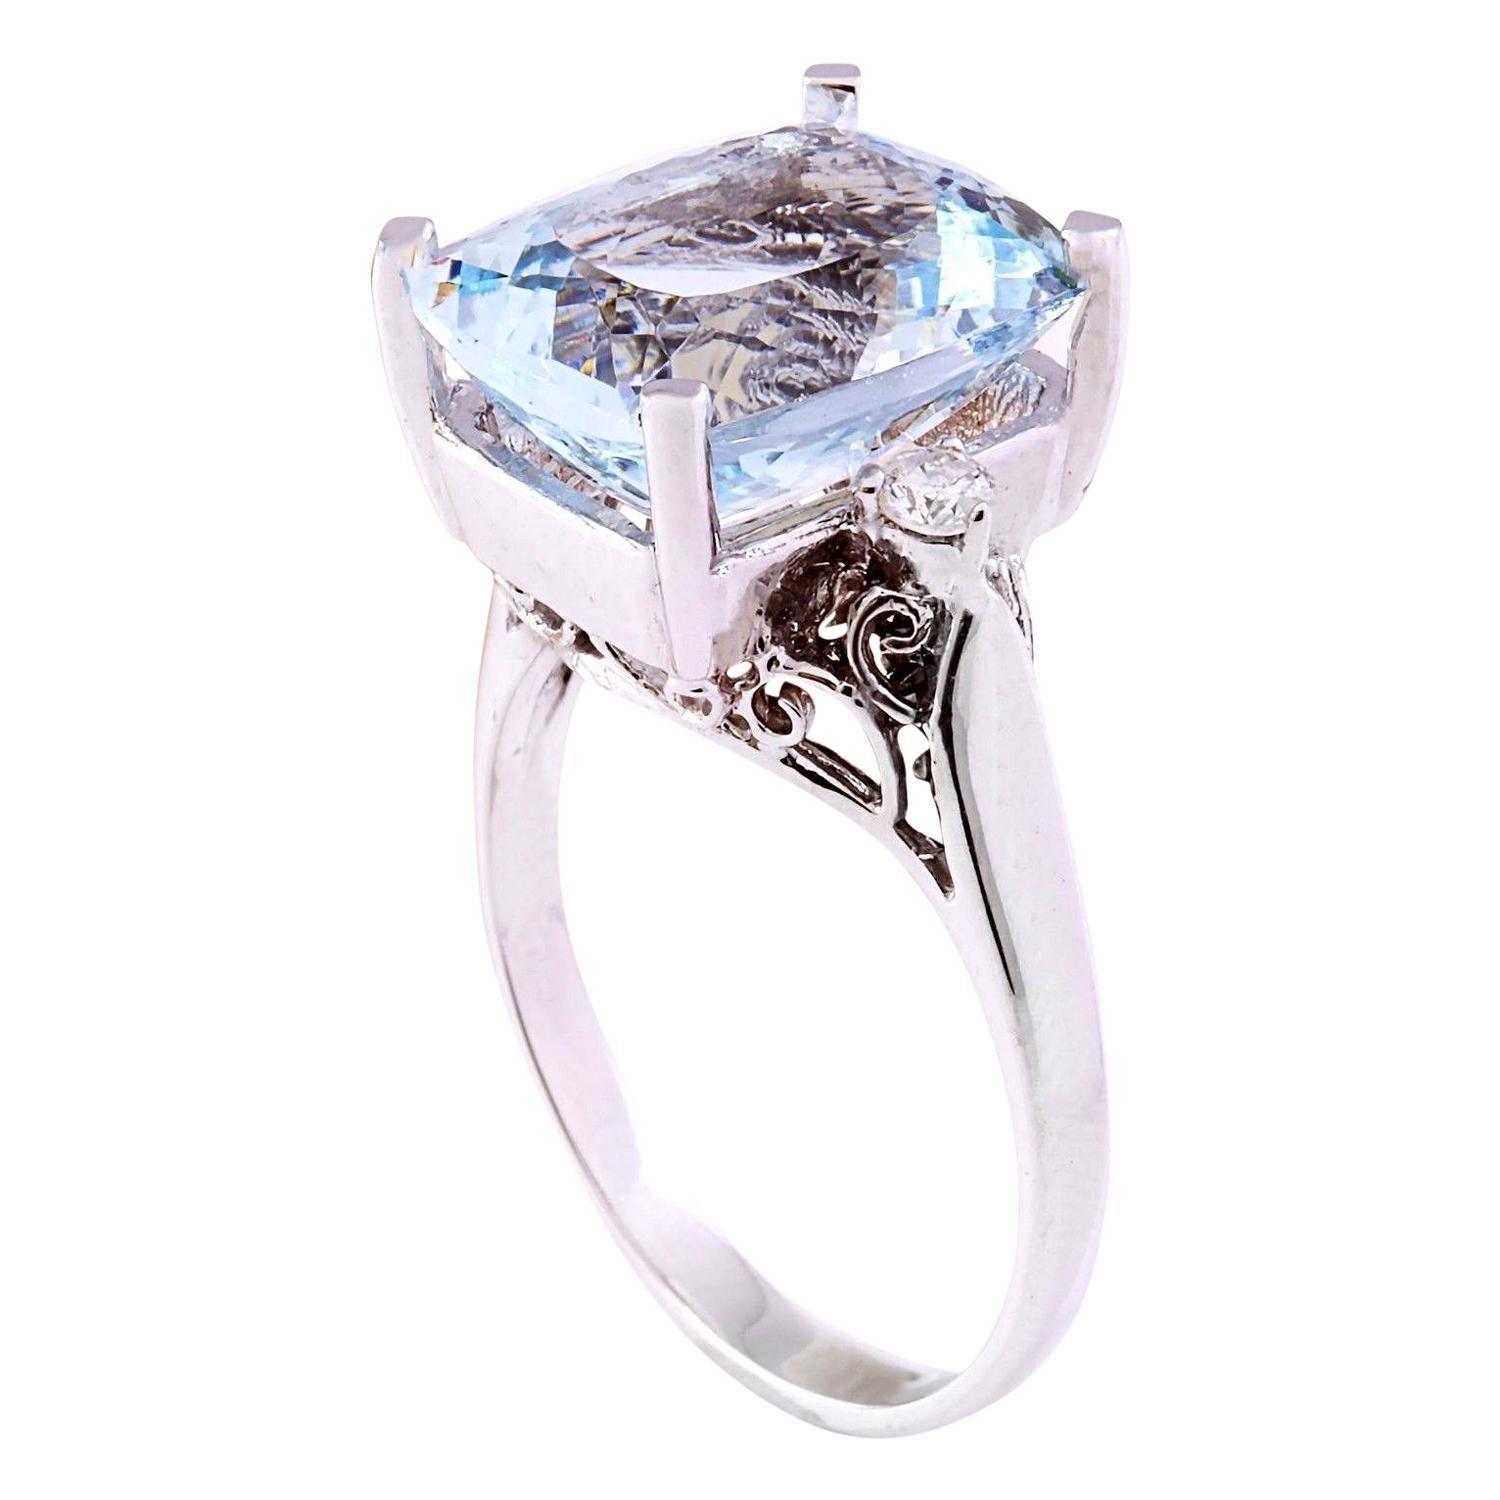 5.58 Carat Natural Aquamarine 14 Karat Solid White Gold Diamond Ring In New Condition For Sale In Los Angeles, CA